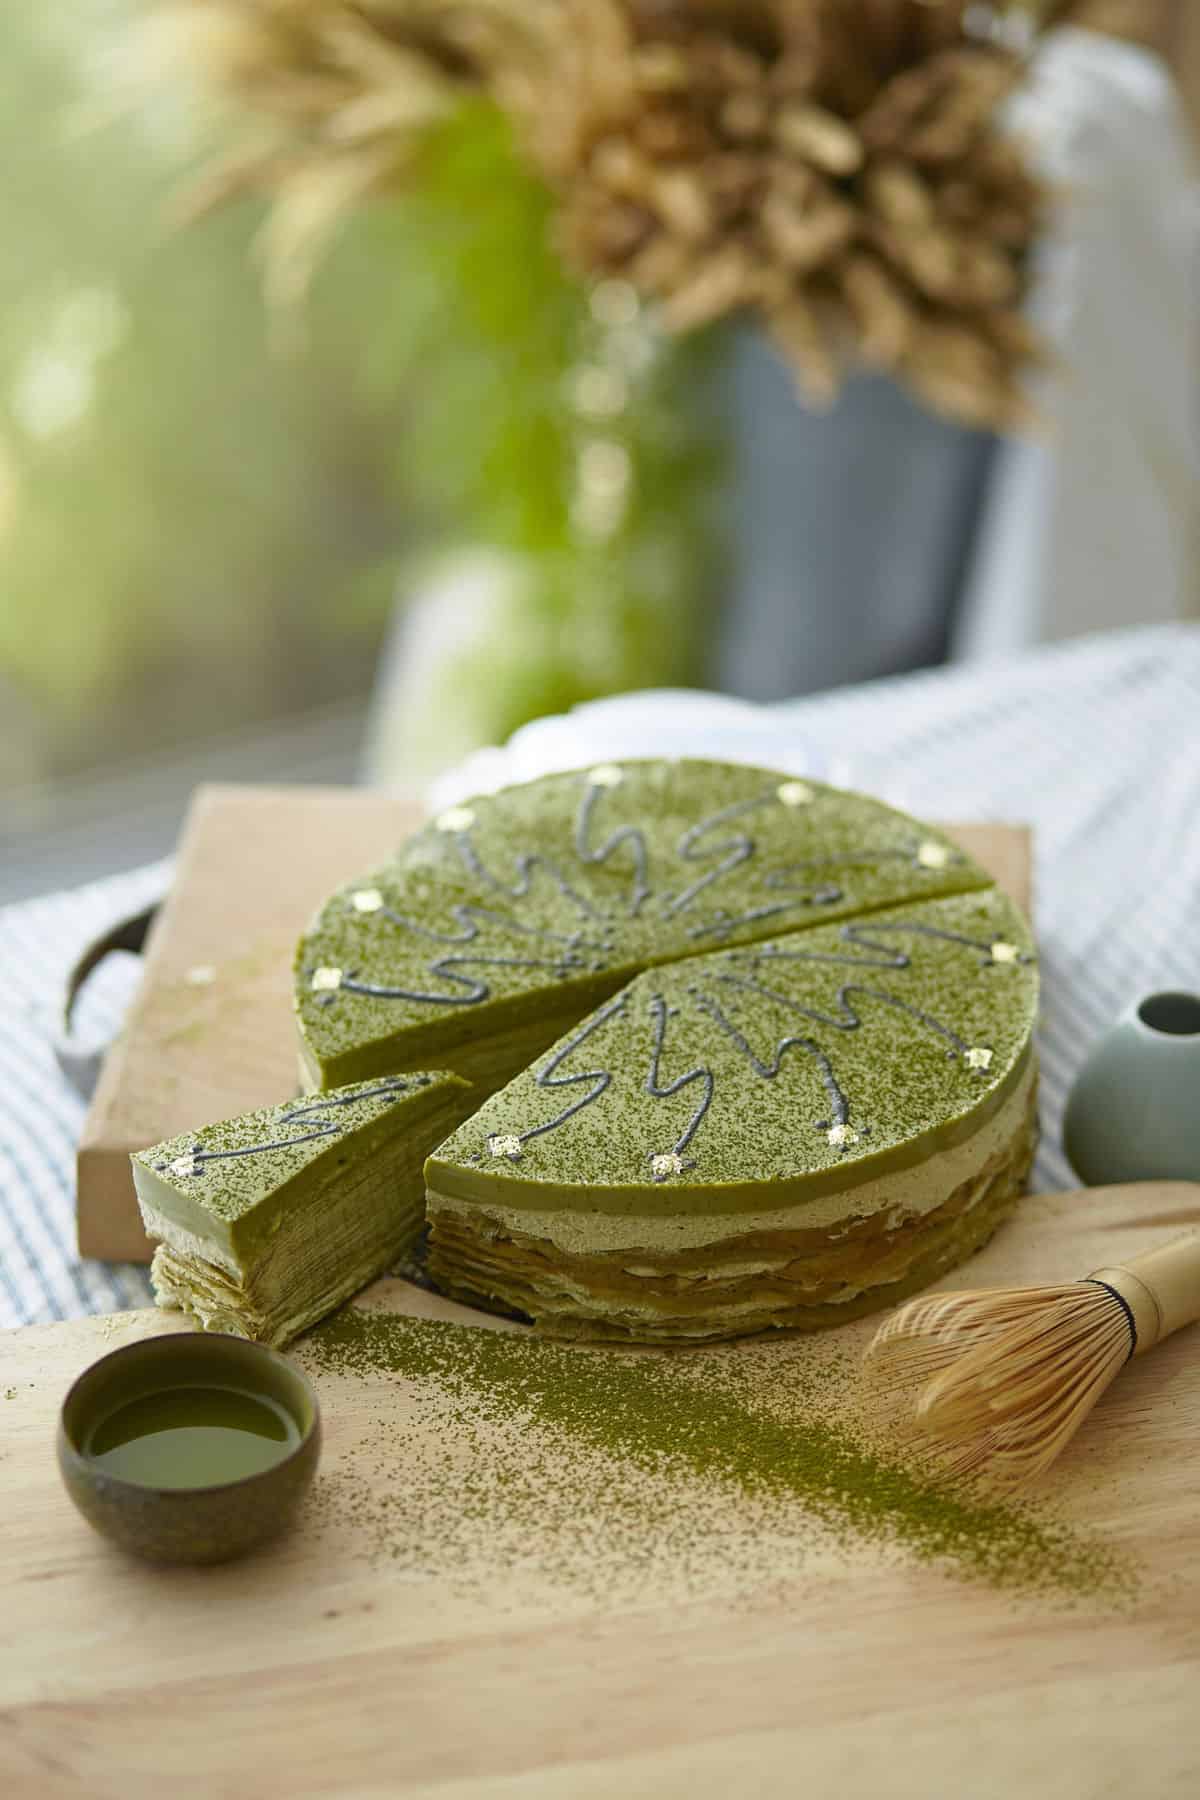 a light wood cutting board with green matcha powder around decoratively with a small dark colored cup of matcha on the left and a matcha whisk on the right in front of a beautifully baked layered cake with light green and white layers and decorative zig zag swirls on top of the cake to represent the culinary grade uses for matcha